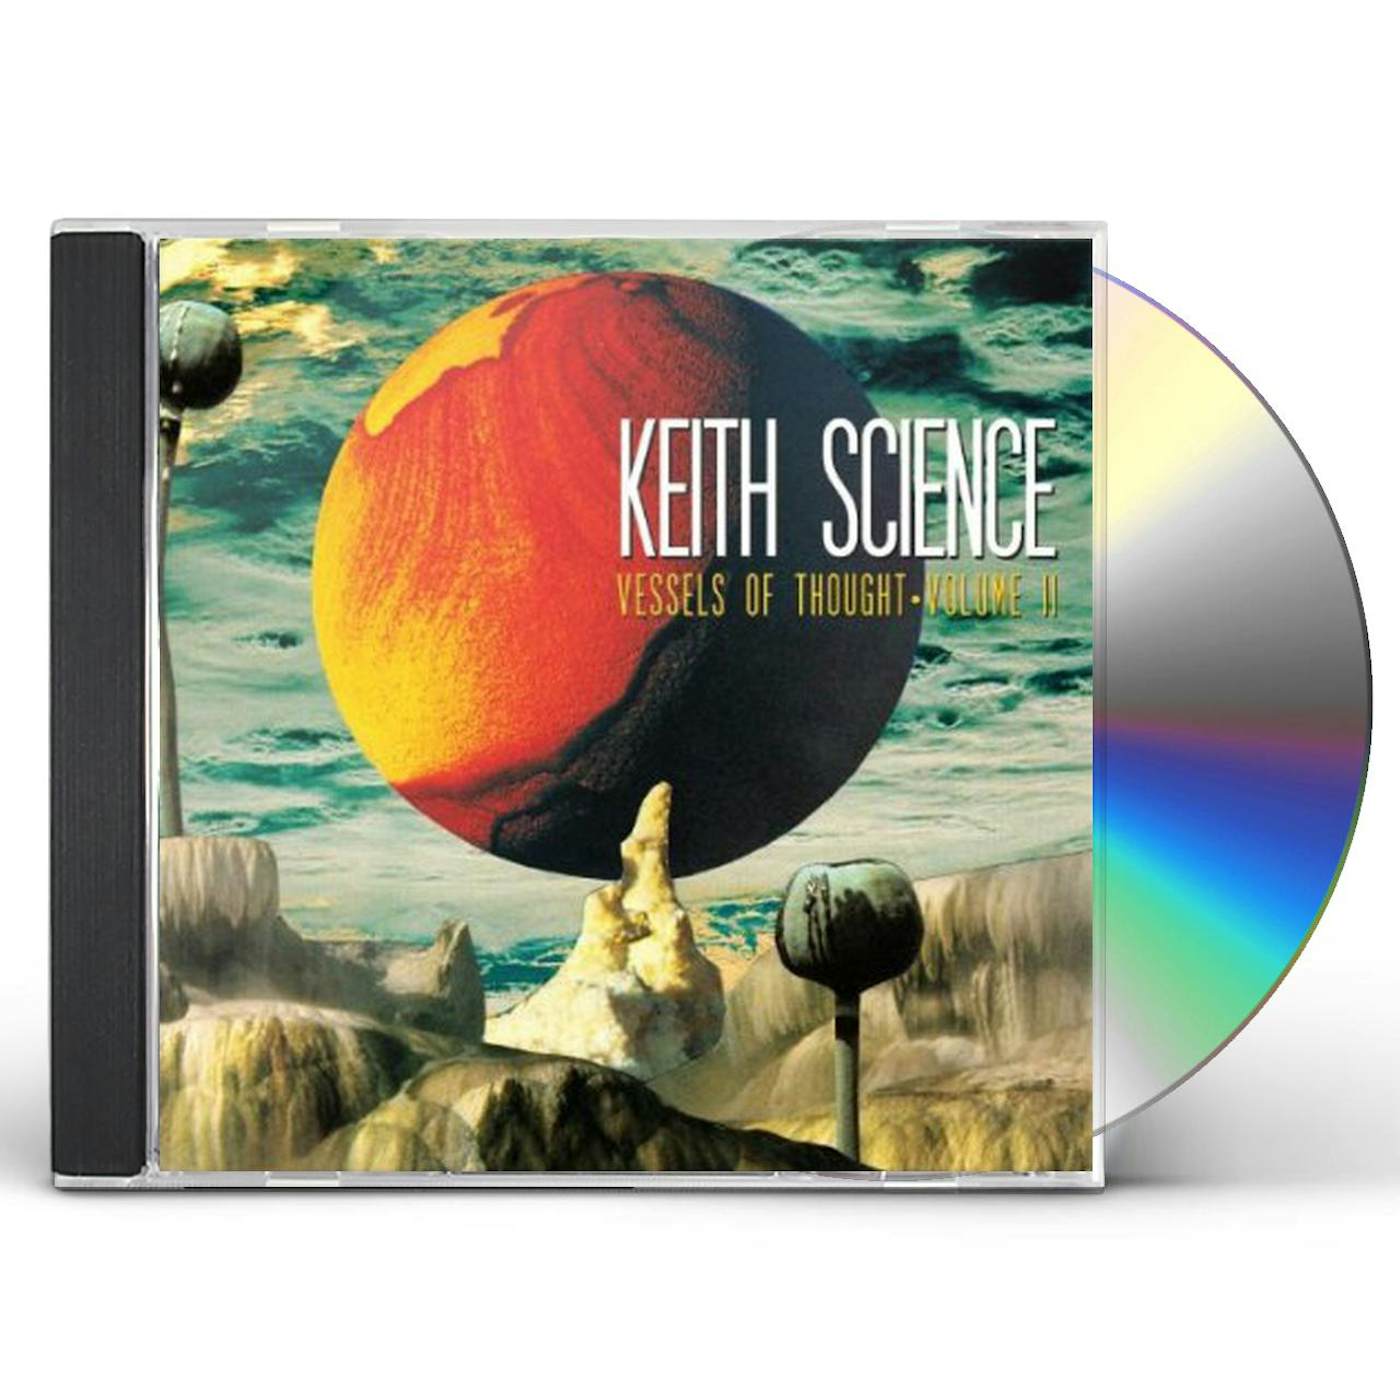 Keith Science VESSELS OF THOUGHT 2 CD